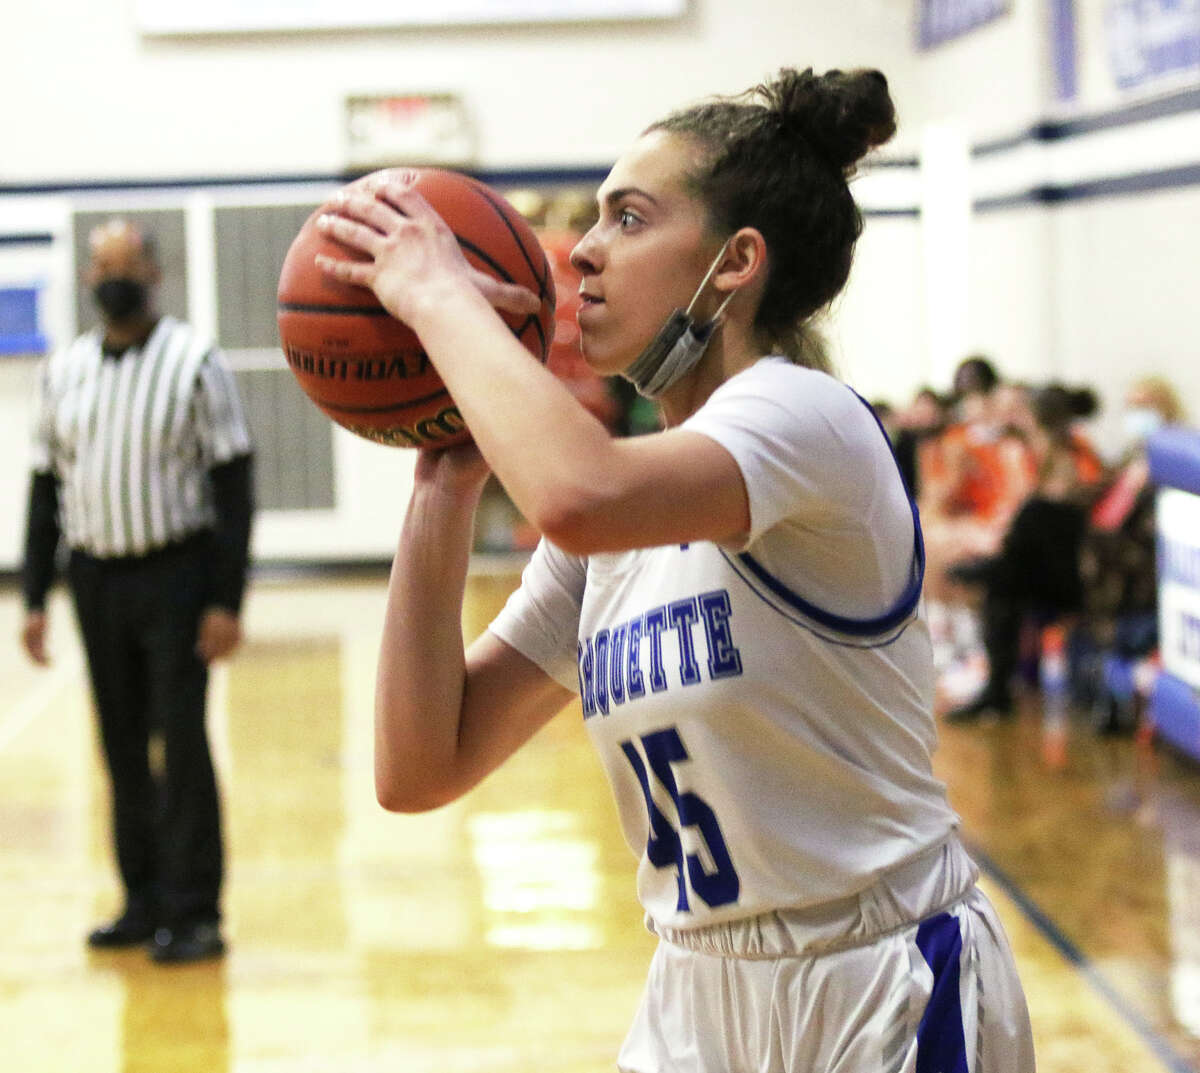 Marquette Catholic's Chloe White eyes a baseline 3-pointer during Saturday's game against Decatur St. Teresa in Alton.